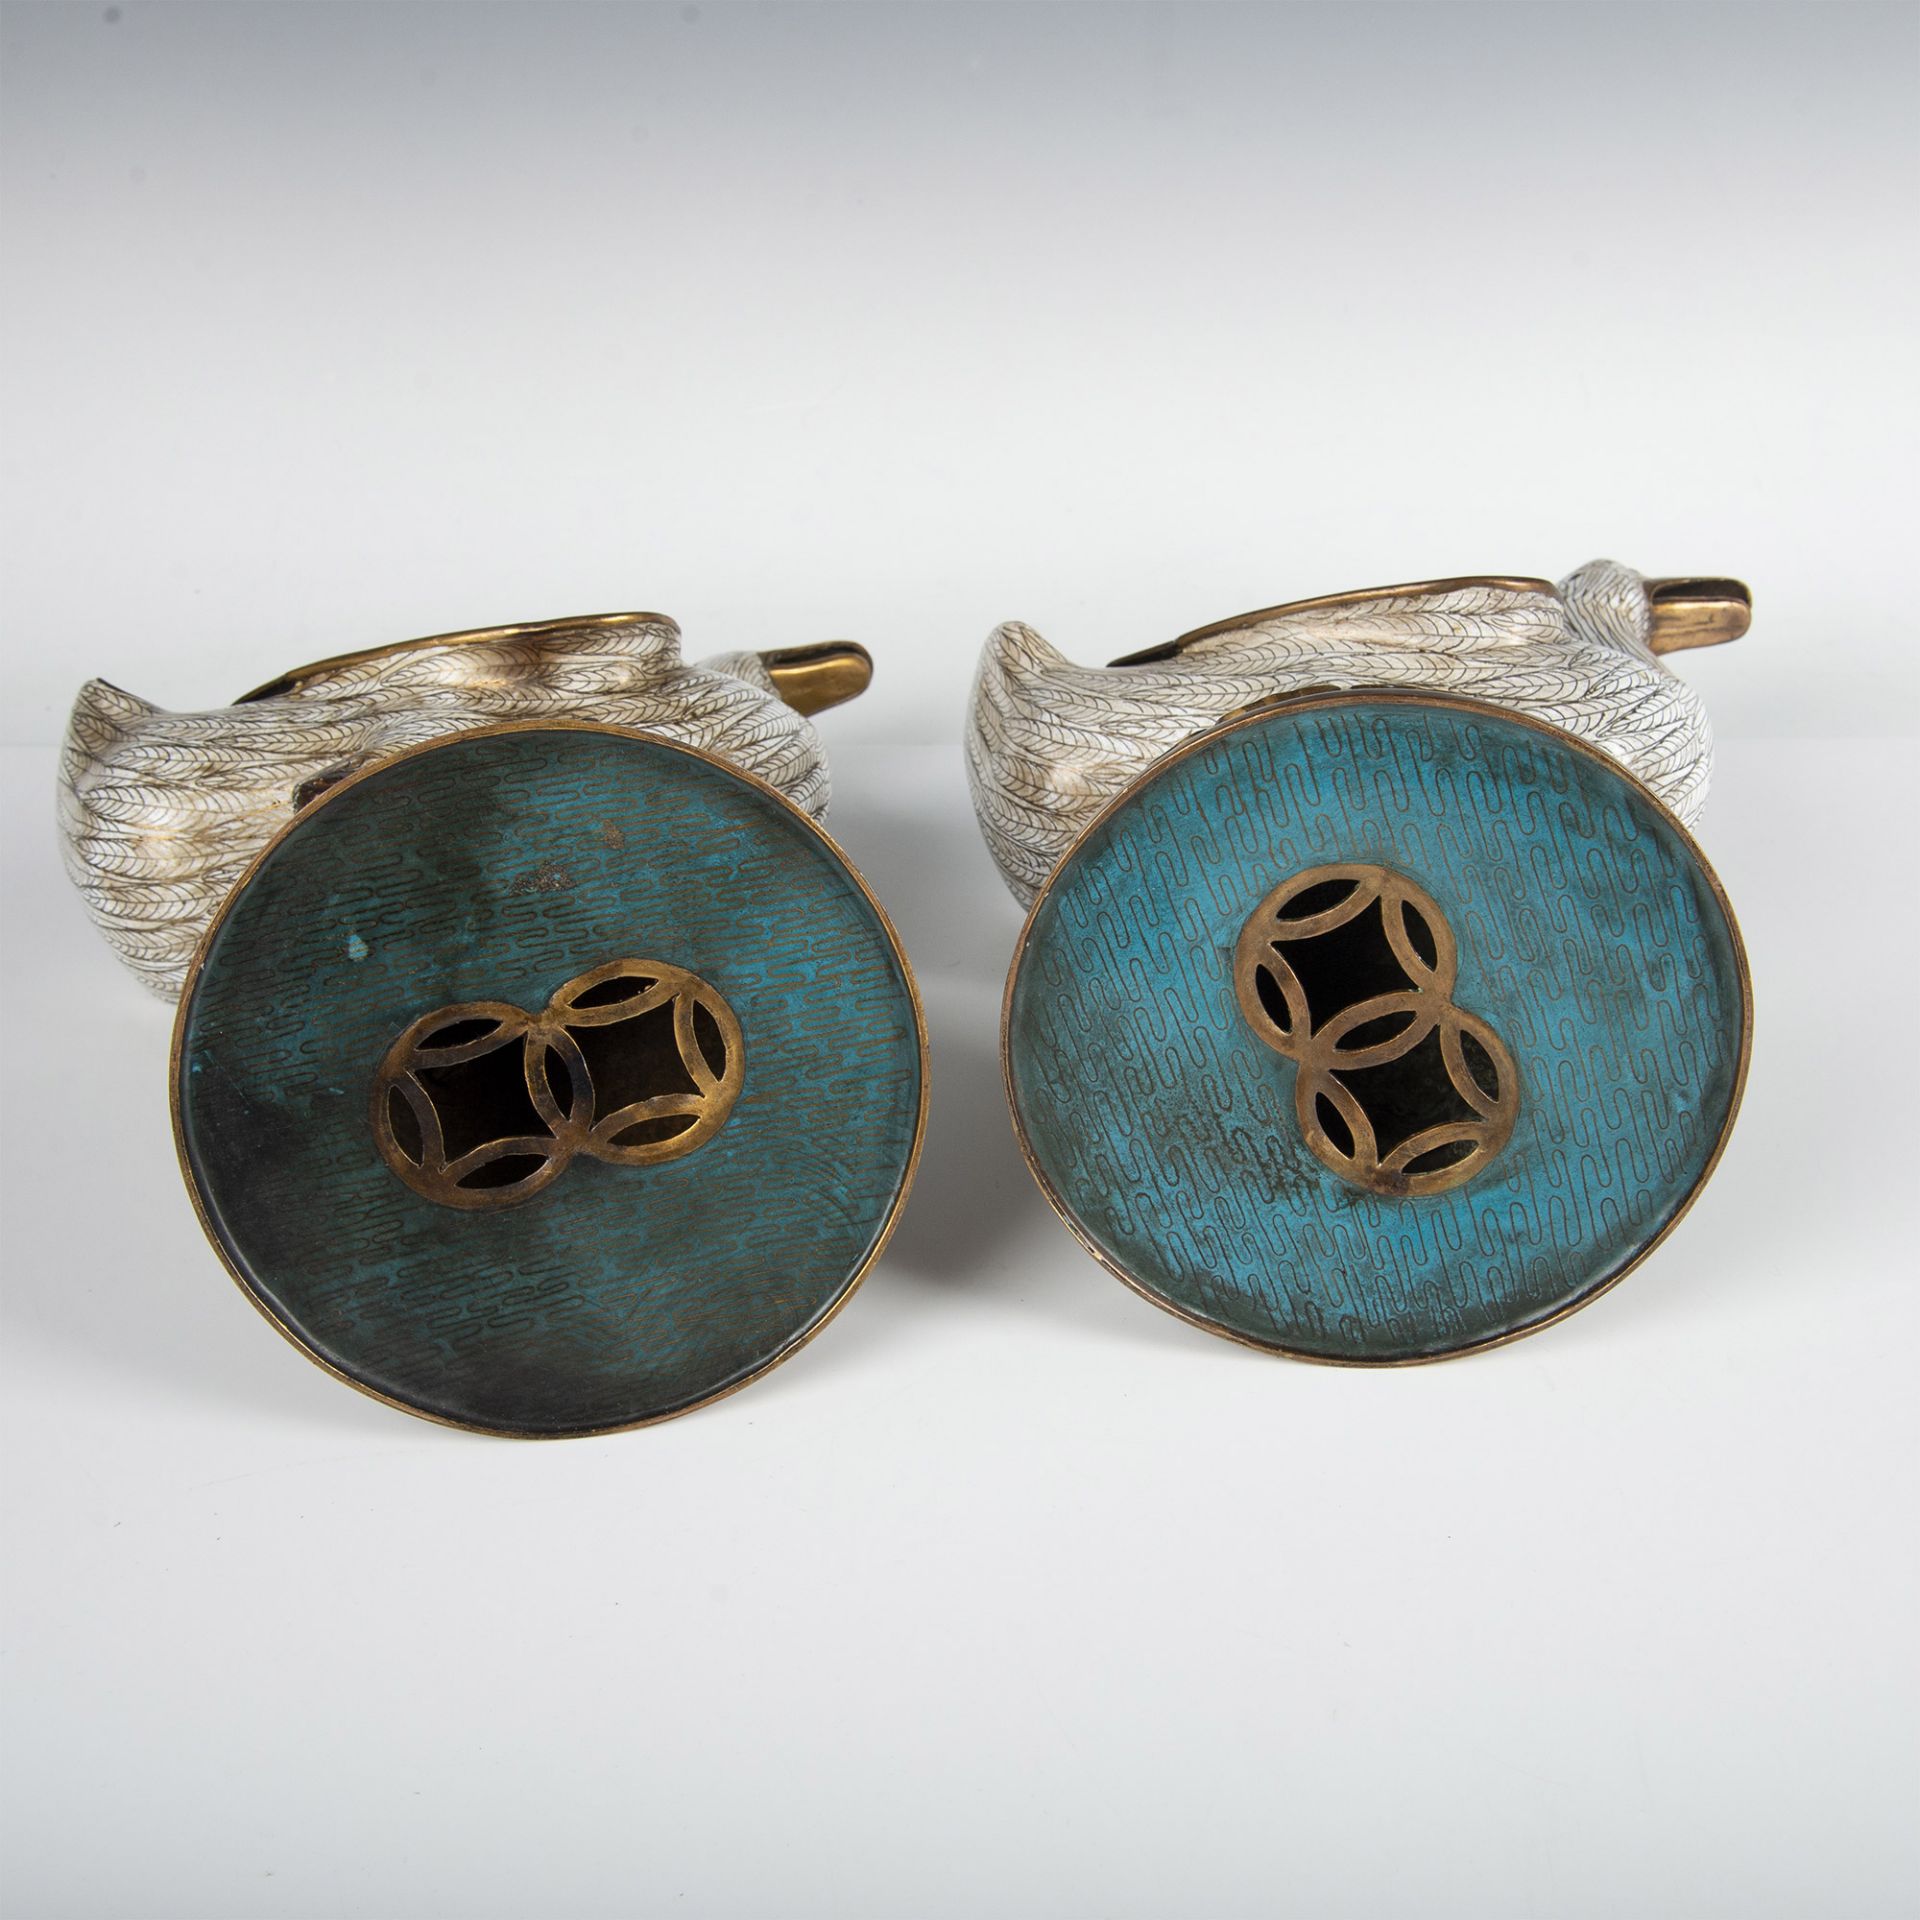 Pair of Chinese Cloisonne Duck Censers - Image 11 of 11